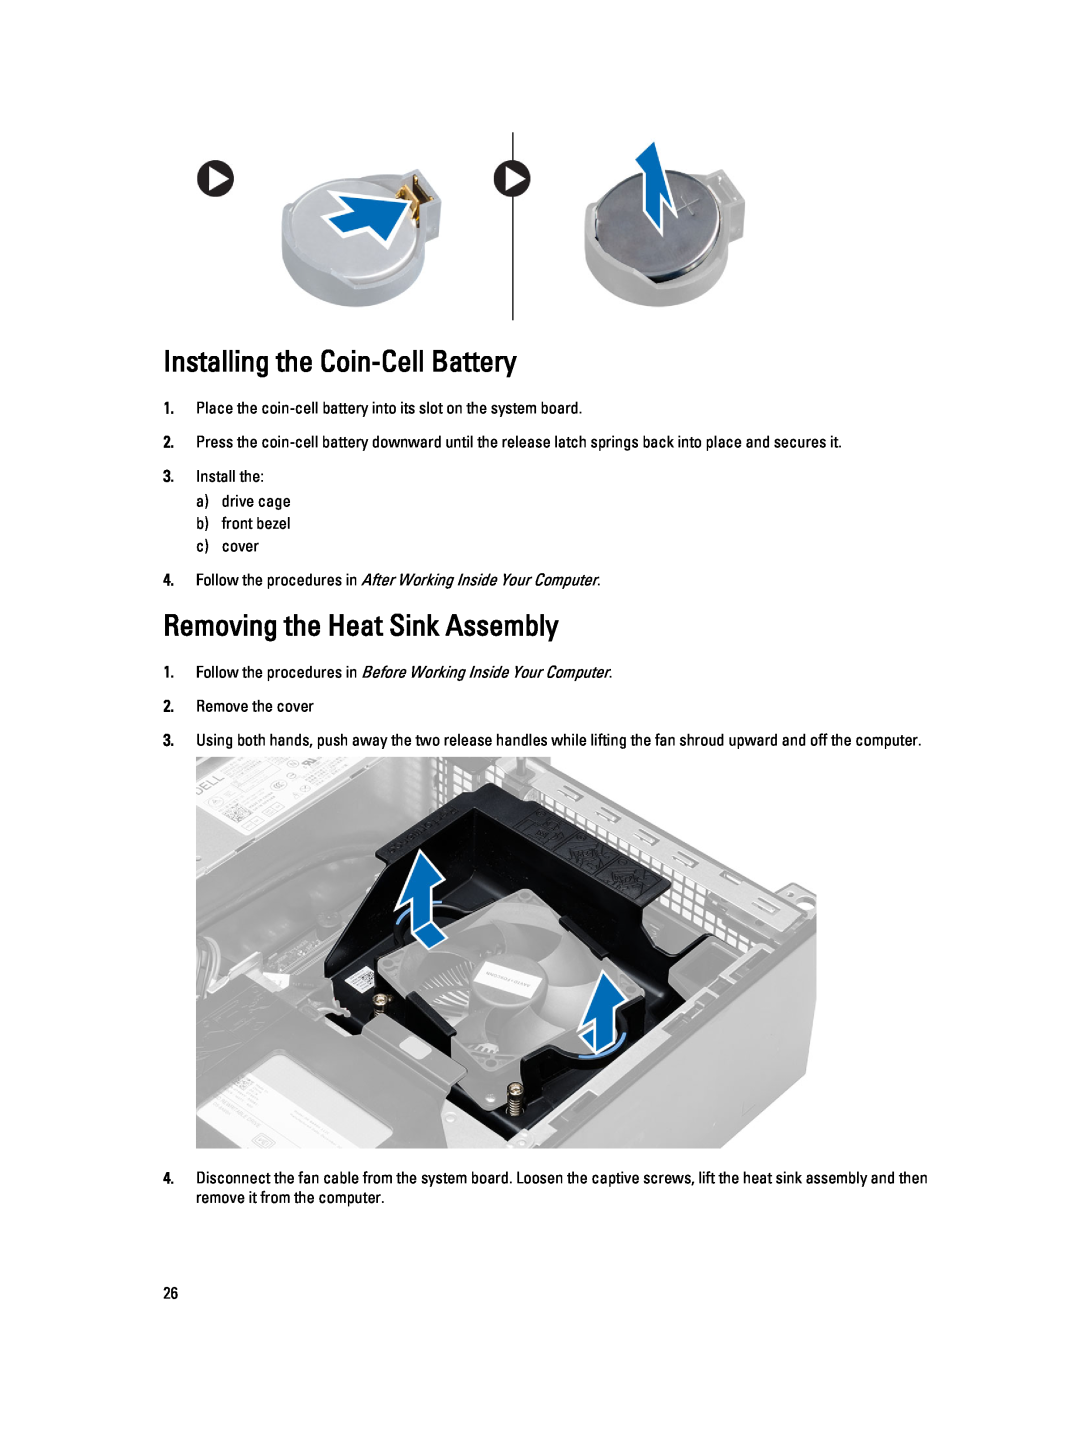 Dell T1700 owner manual Installing the Coin-Cell Battery, Removing the Heat Sink Assembly 